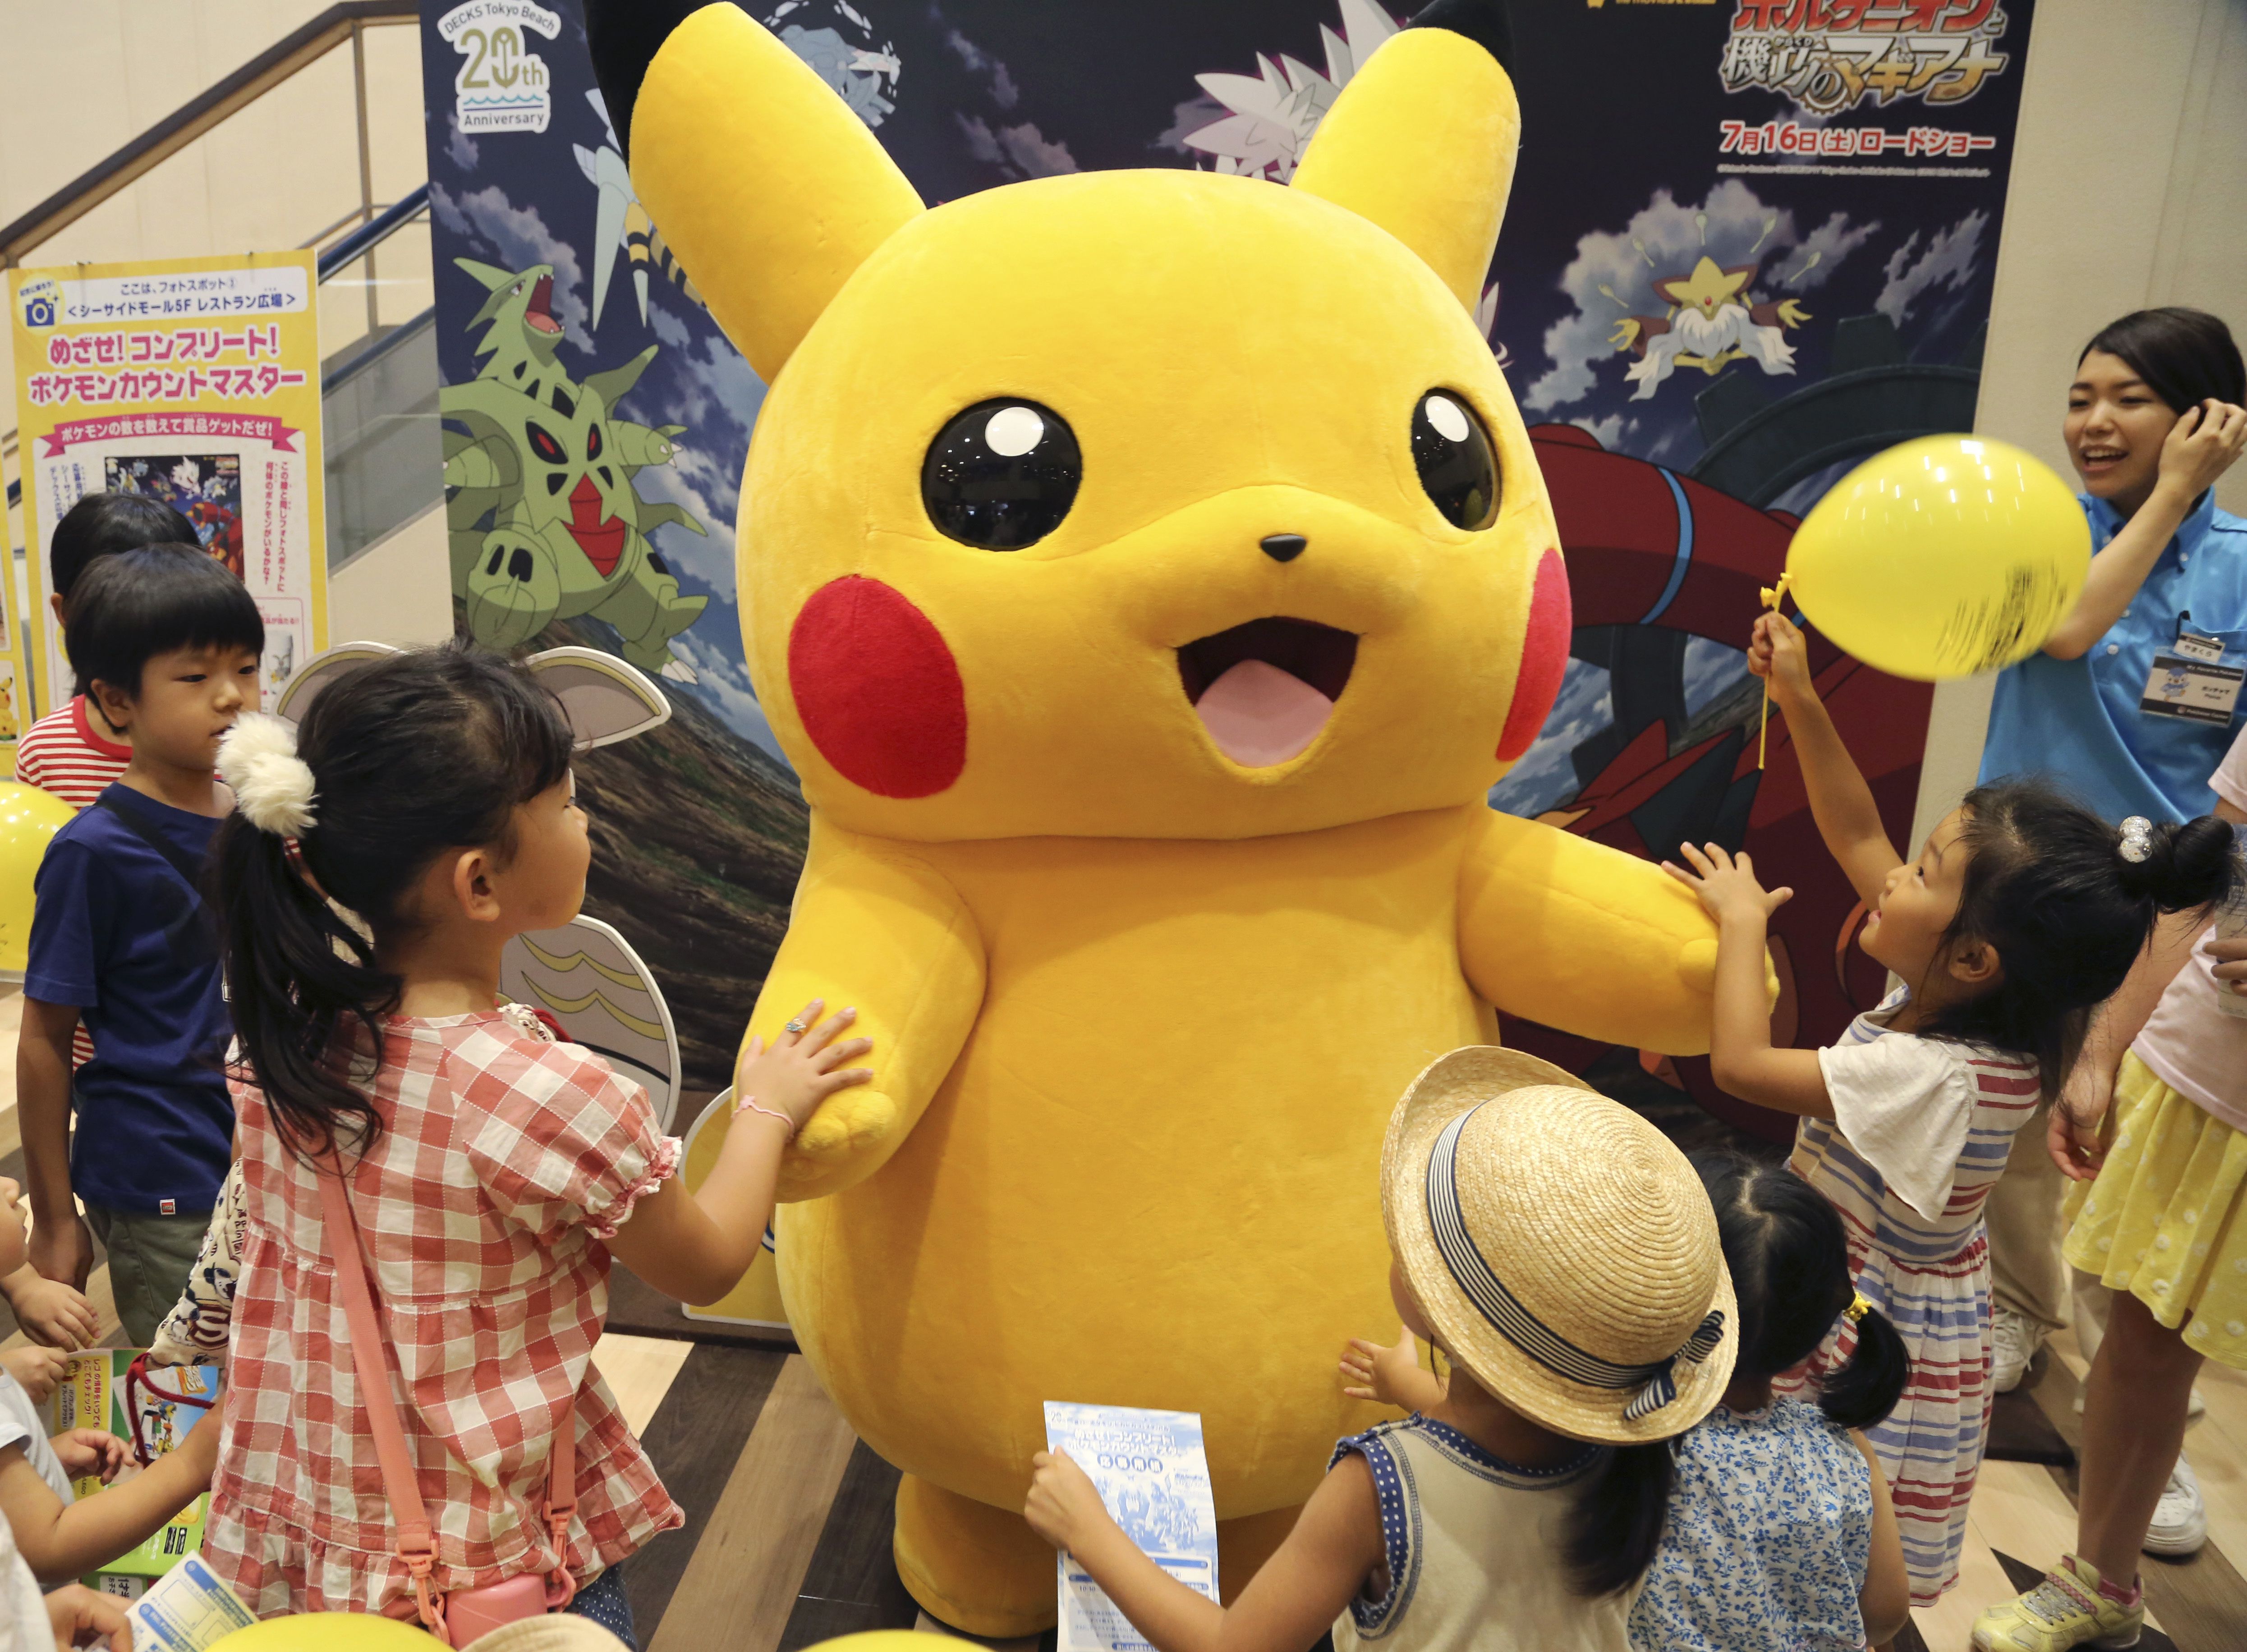 FILE - In this July 18, 2016, file photo, a stuffed toy of Pikachu, a Pokemon character, is surrounded by children during a Pokemon festival in Tokyo. A real-life Pikachu statue appeared in a New Orleans park. New Orleans police told ABC News for a story published August 2, 2016, that they have no plans to remove it. (AP Photo/Koji Sasahara, File)